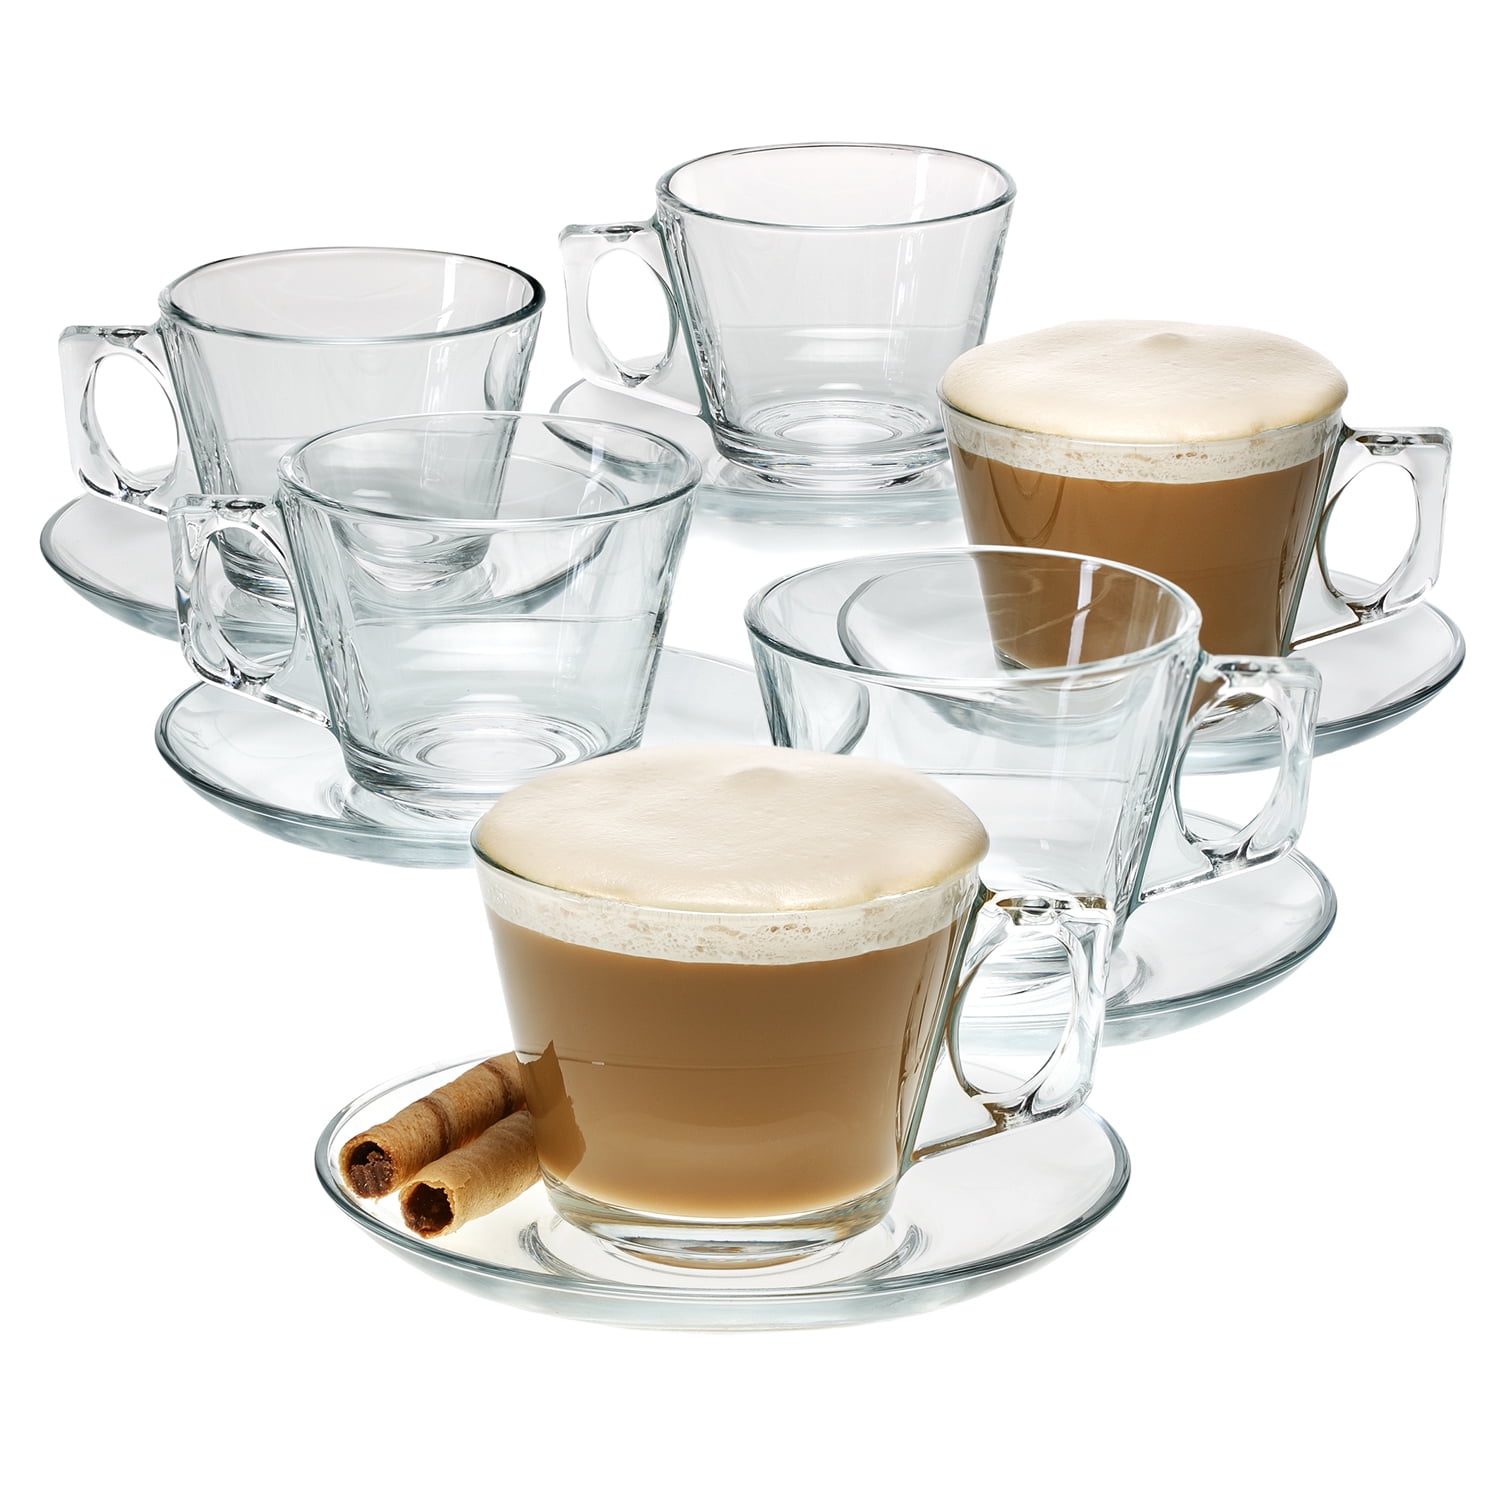 Volarium Tea Cups and Saucers Sets, 6PCs Clear Glass Coffee  Mugs and 6PCs Glass Saucers, Ideal 6.5 Ounce Size for Cappuccino, Specialty  Coffee Drinks, Latte, Cafe Mocha and Tea: Cup